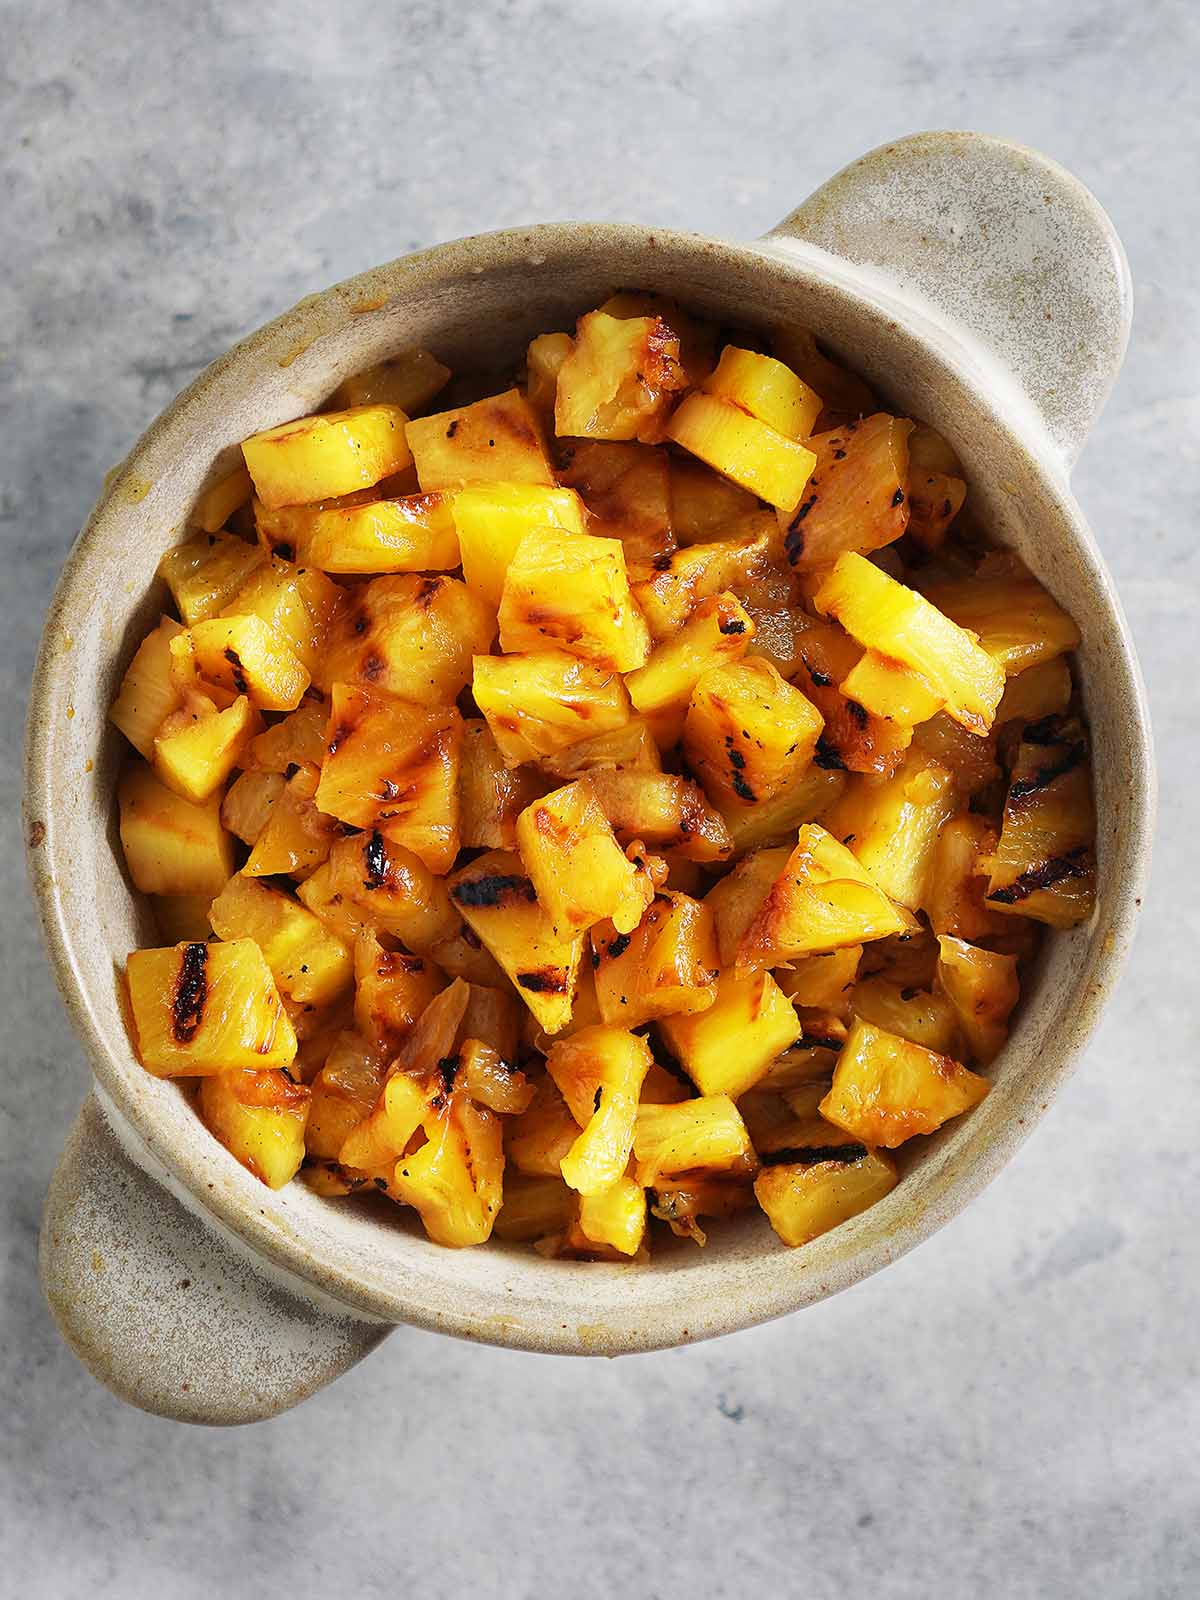 Small grilled pineapple chunks in a bowl.